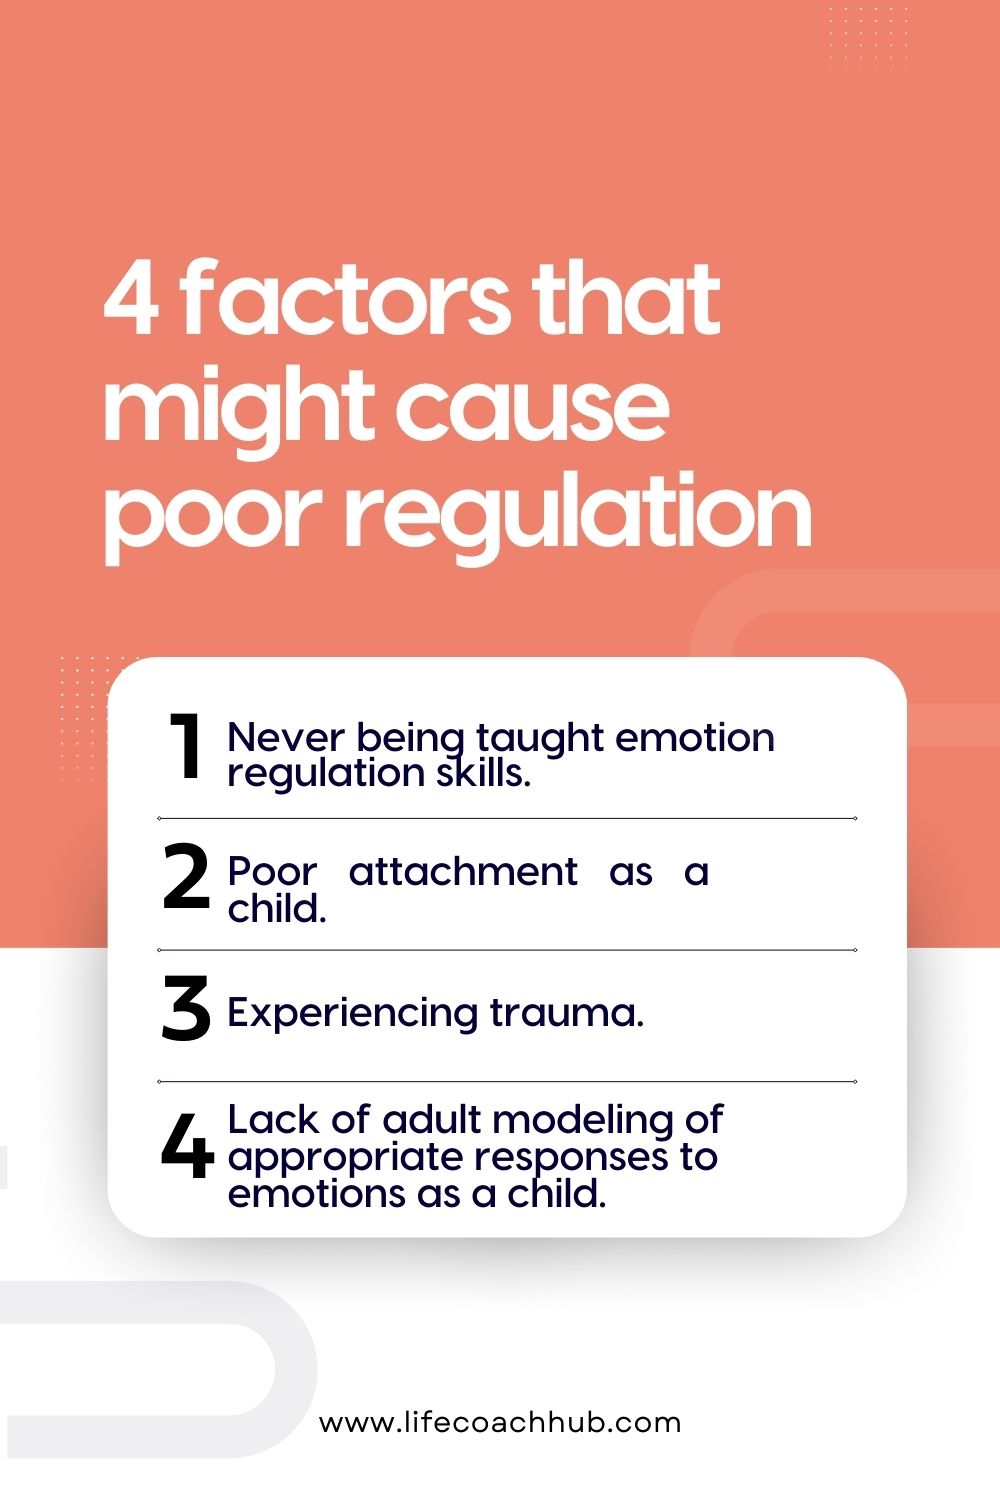 4 Factors that might cause poor emotional regulation